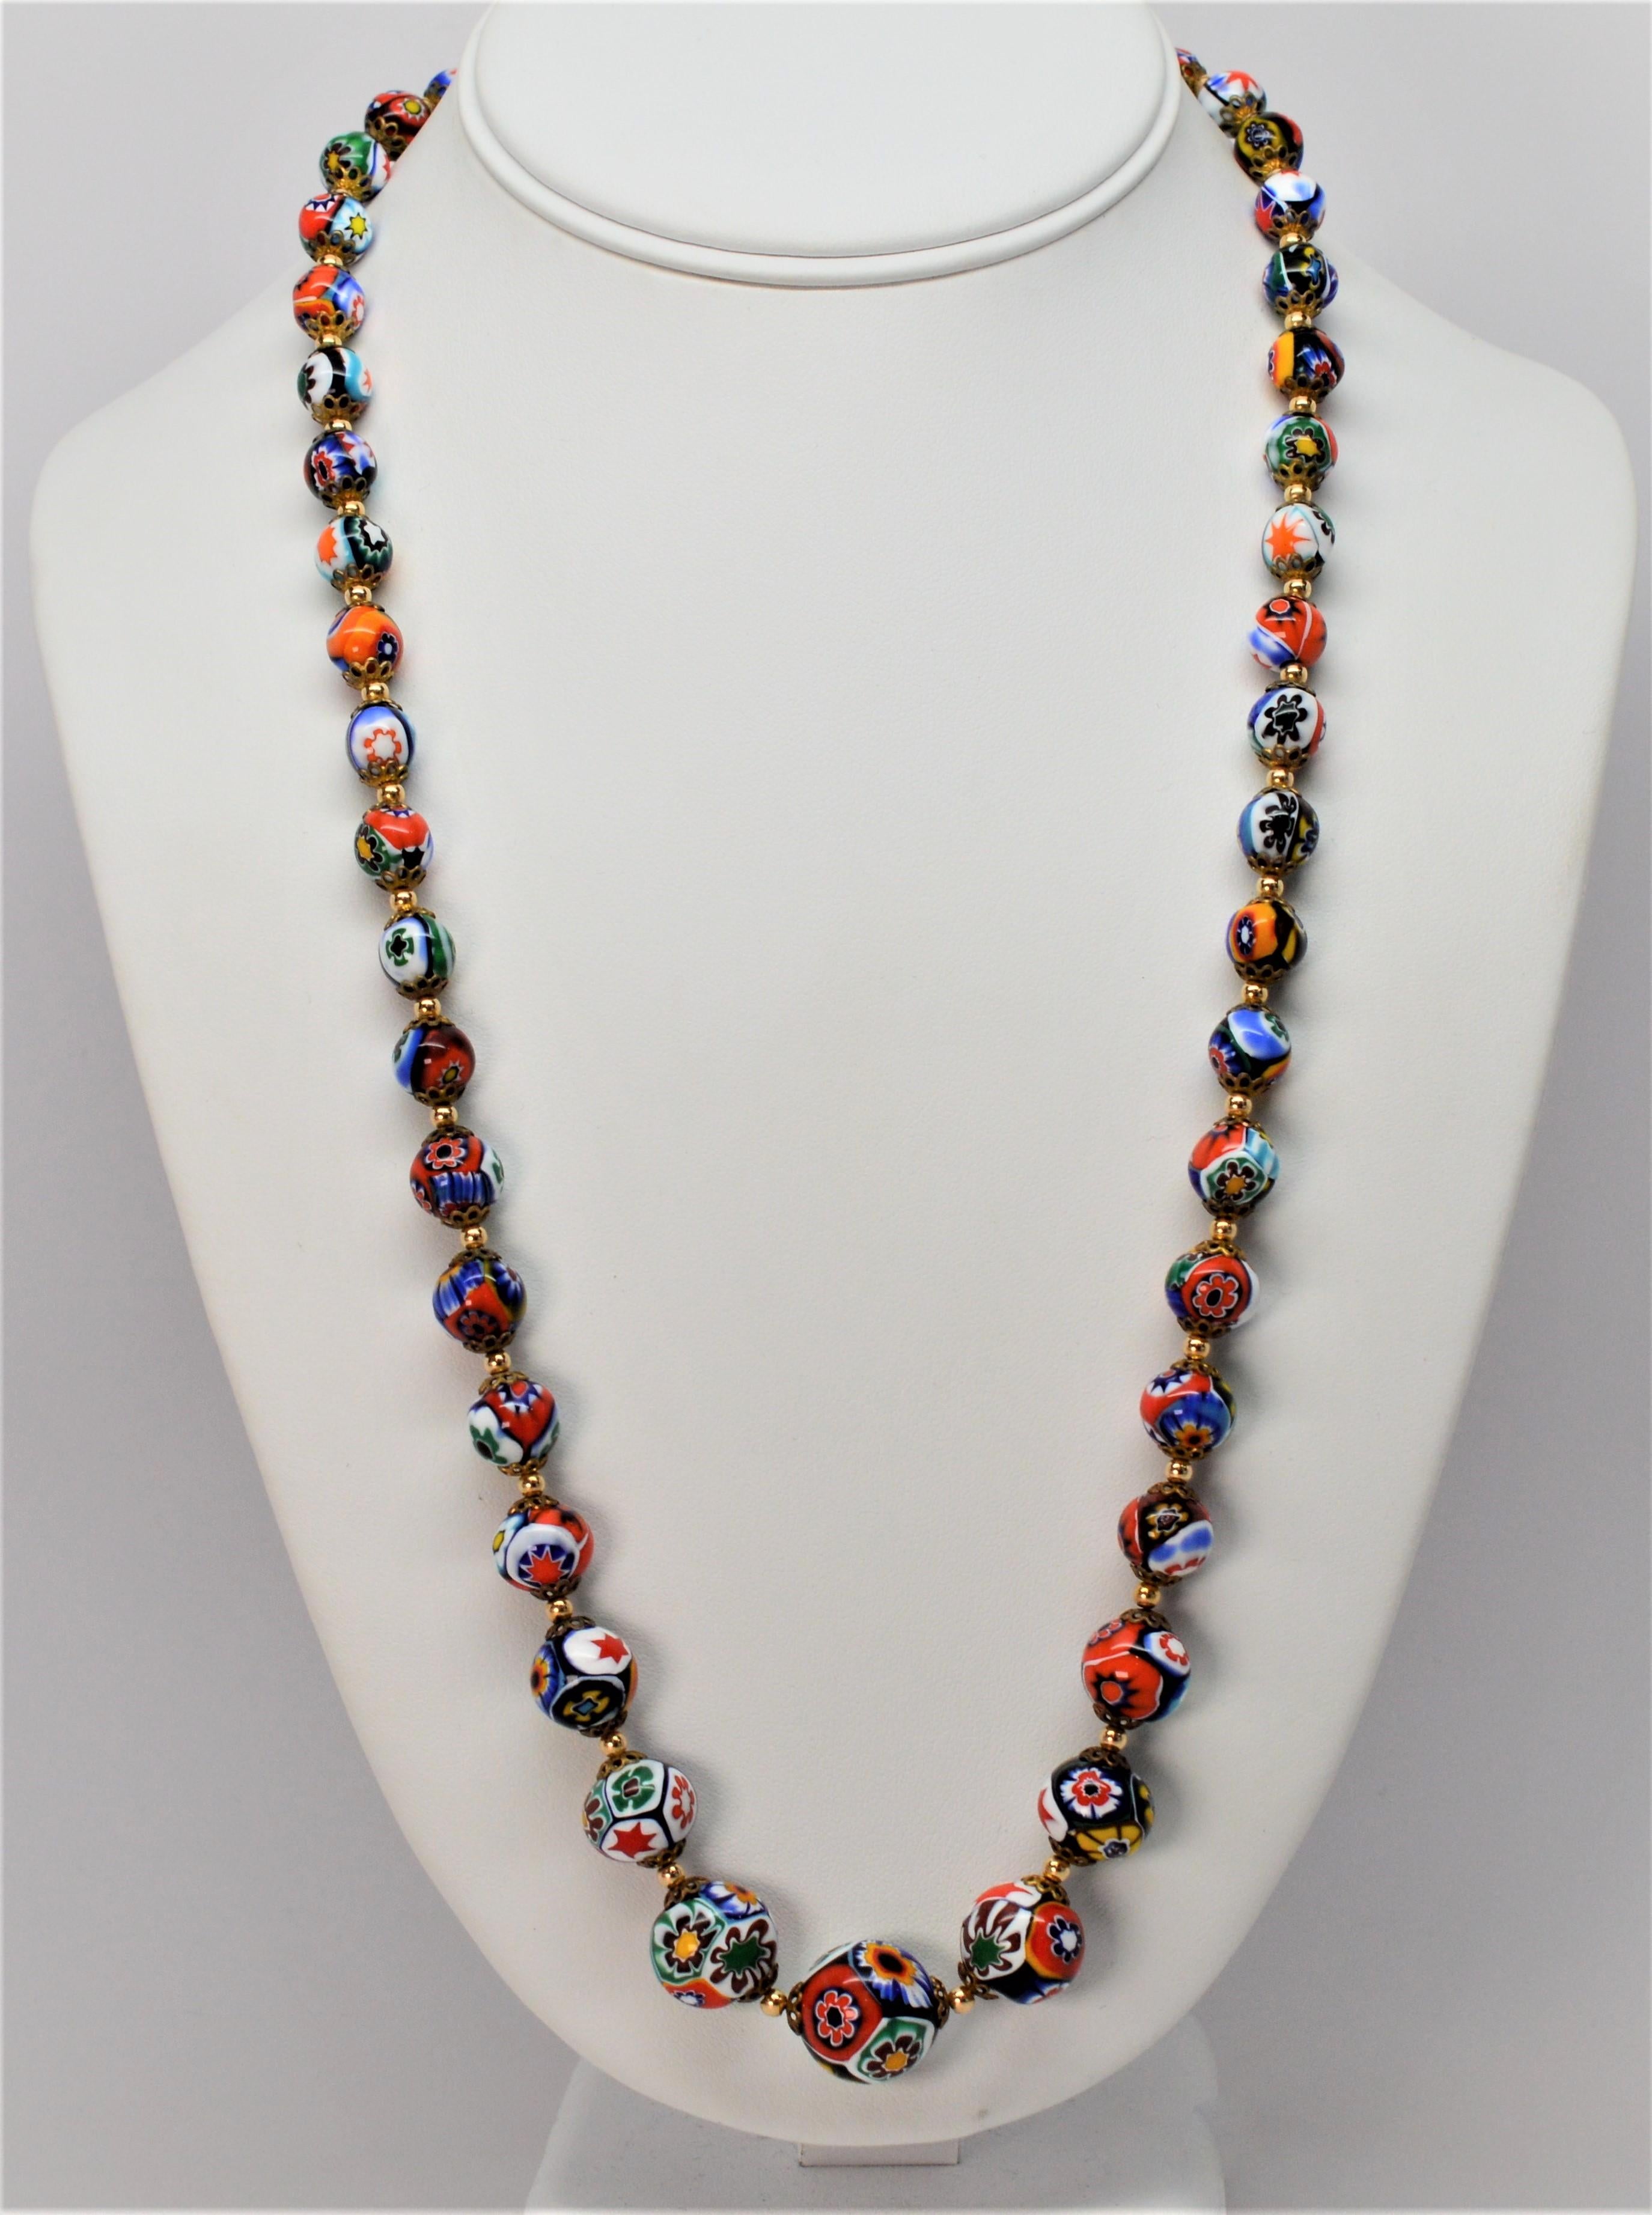 Bright and artful, this mid-century twenty four inch necklace is hand-strung with beautiful and distinctive Venetian glass beads graduating in size from 7.5mm to 15mm. A mosaic of color, each bead is of distinctive design and complimented with 14